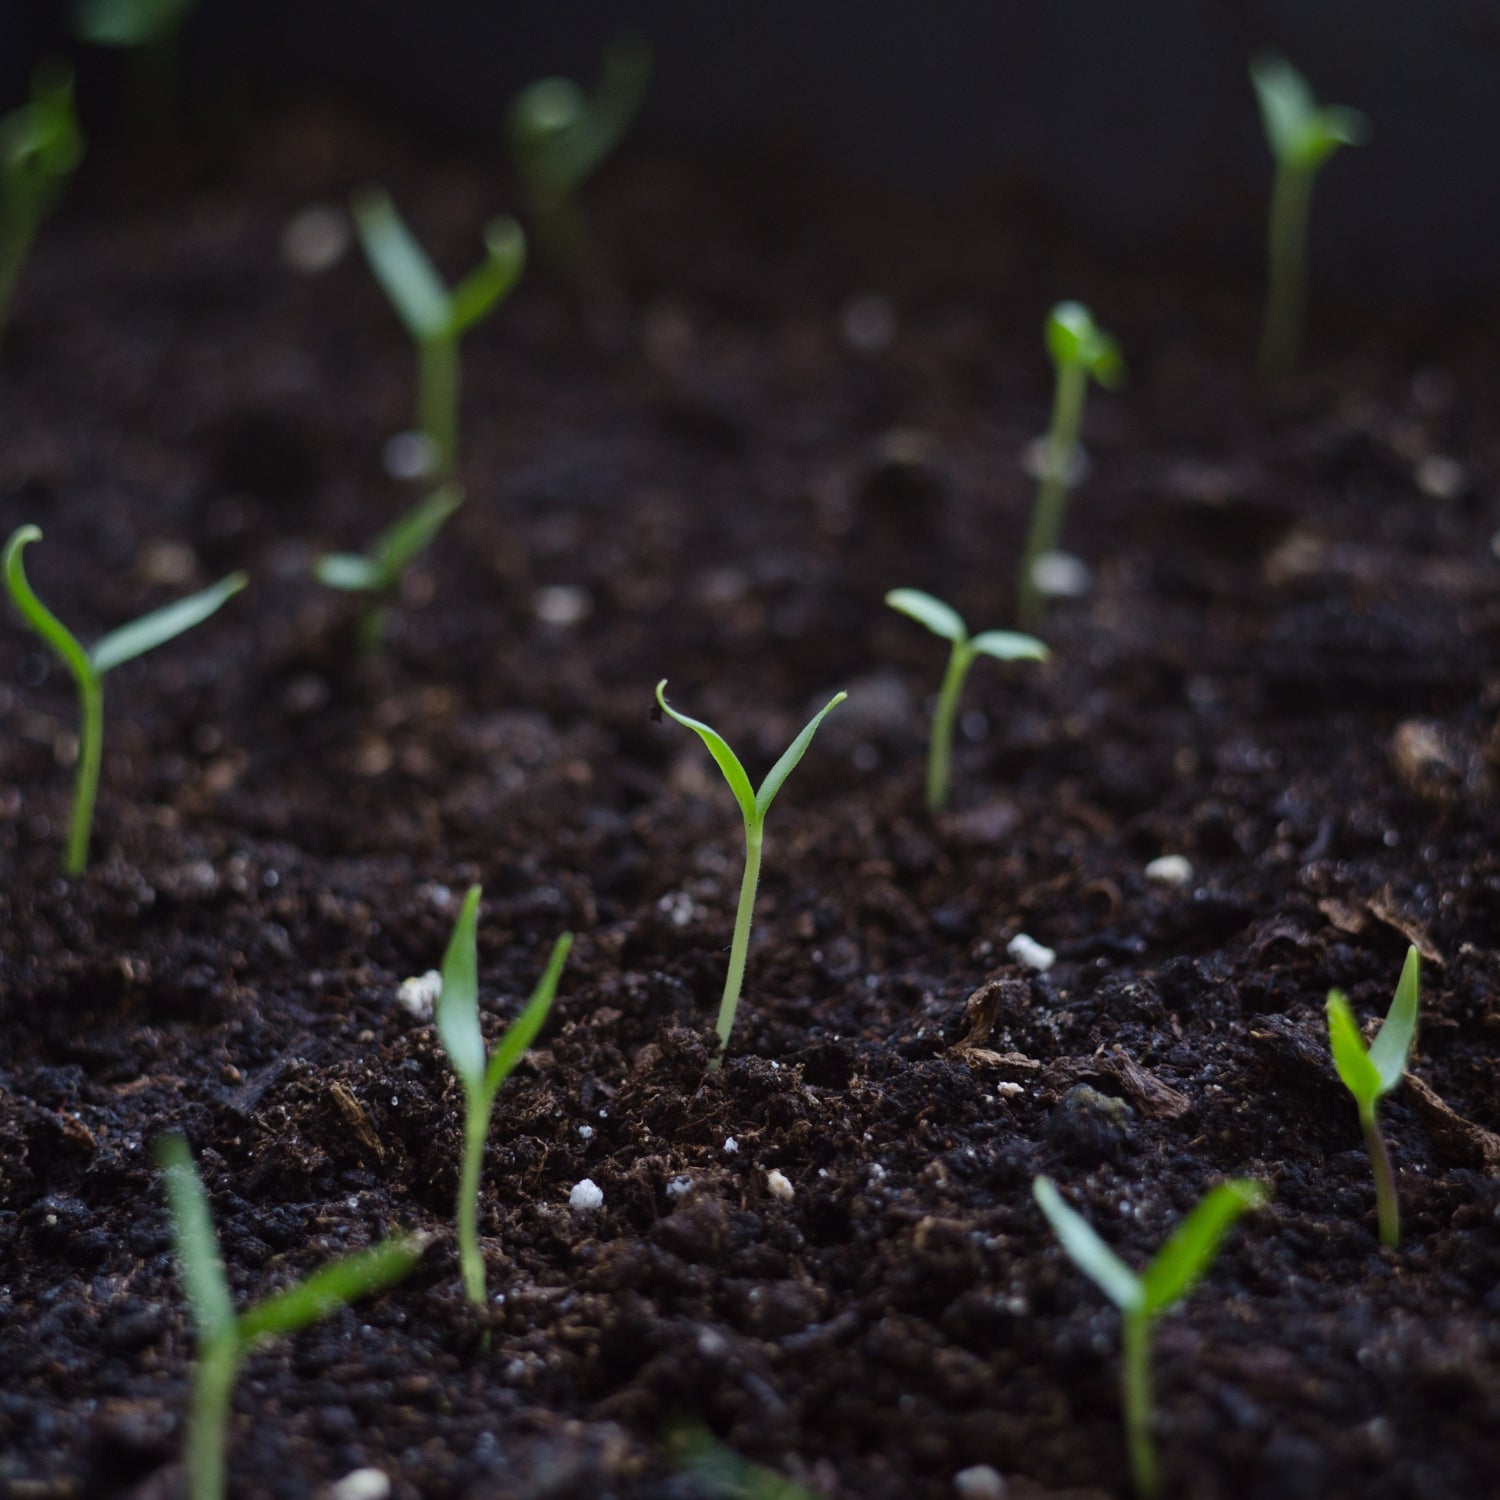 Sprouting seedlings in rich, dark soil, showcasing the early growth stages of plants treated with Korean Natural Farming techniques from Sacred Plant Co.